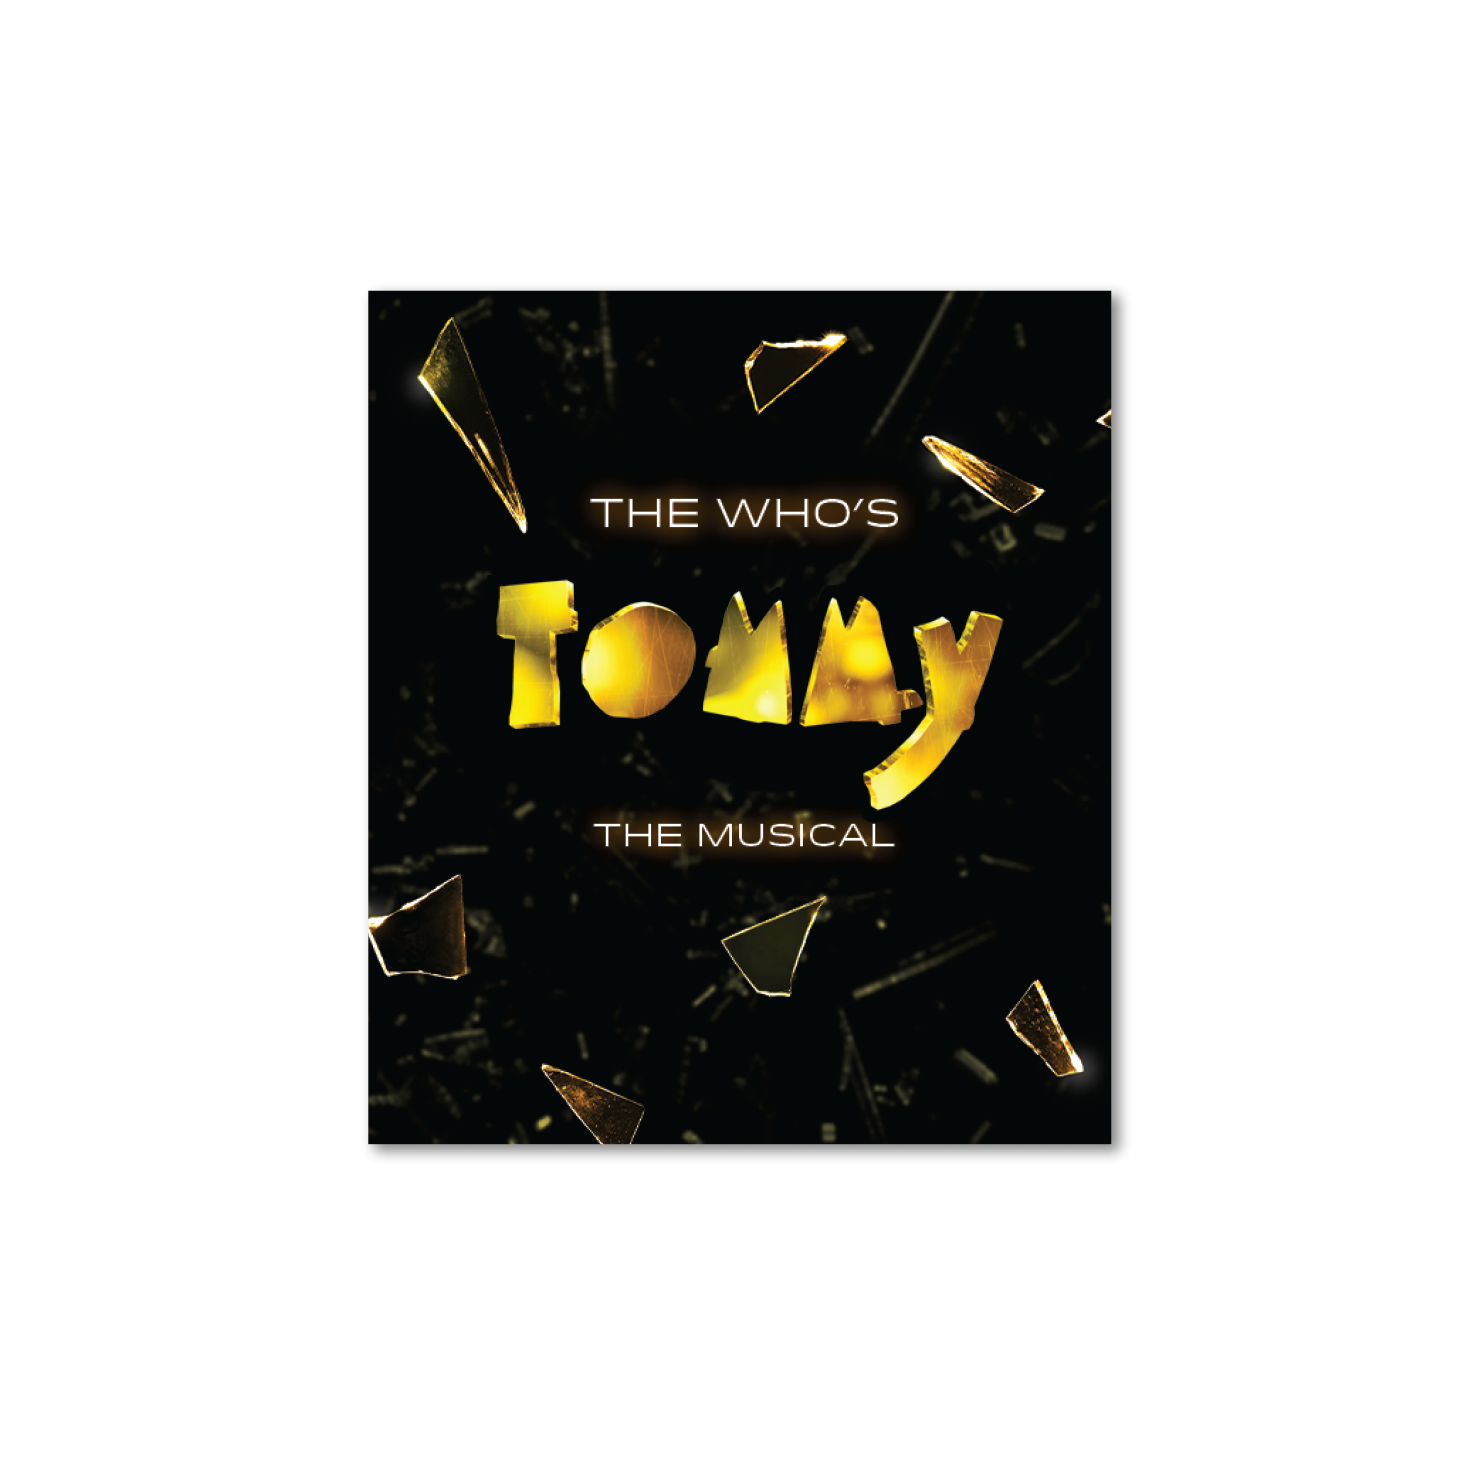 THE WHO's TOMMY Title Lapel Pin Image